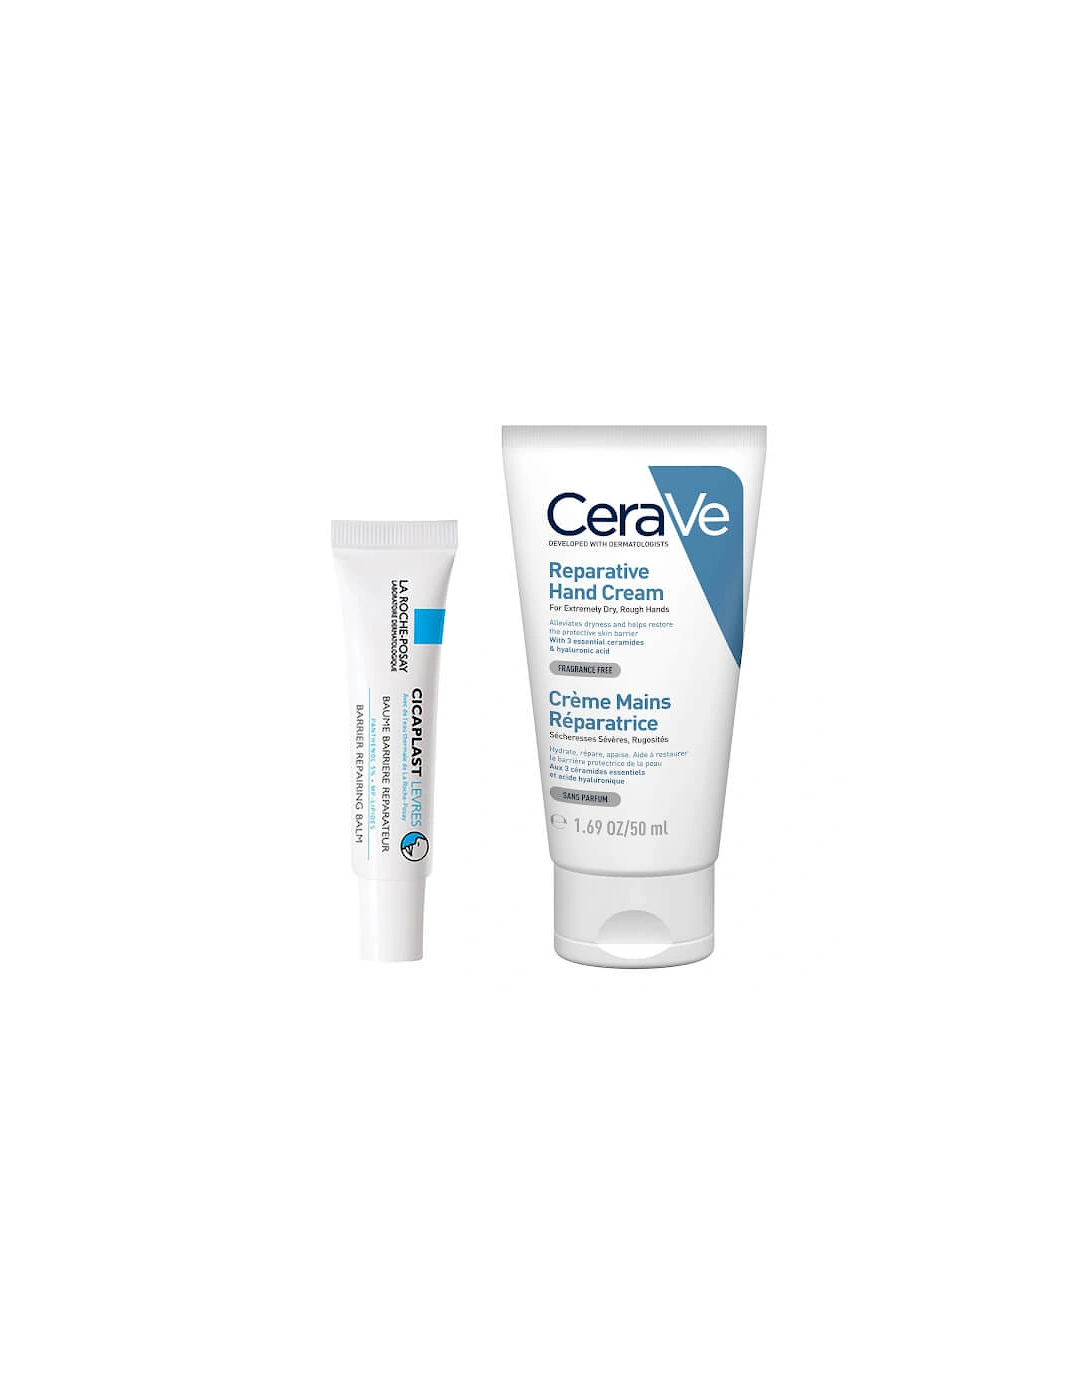 Repair and Hydrate Hand and Lip Duo Expert Skin Routine Bundle - CeraVe, 2 of 1